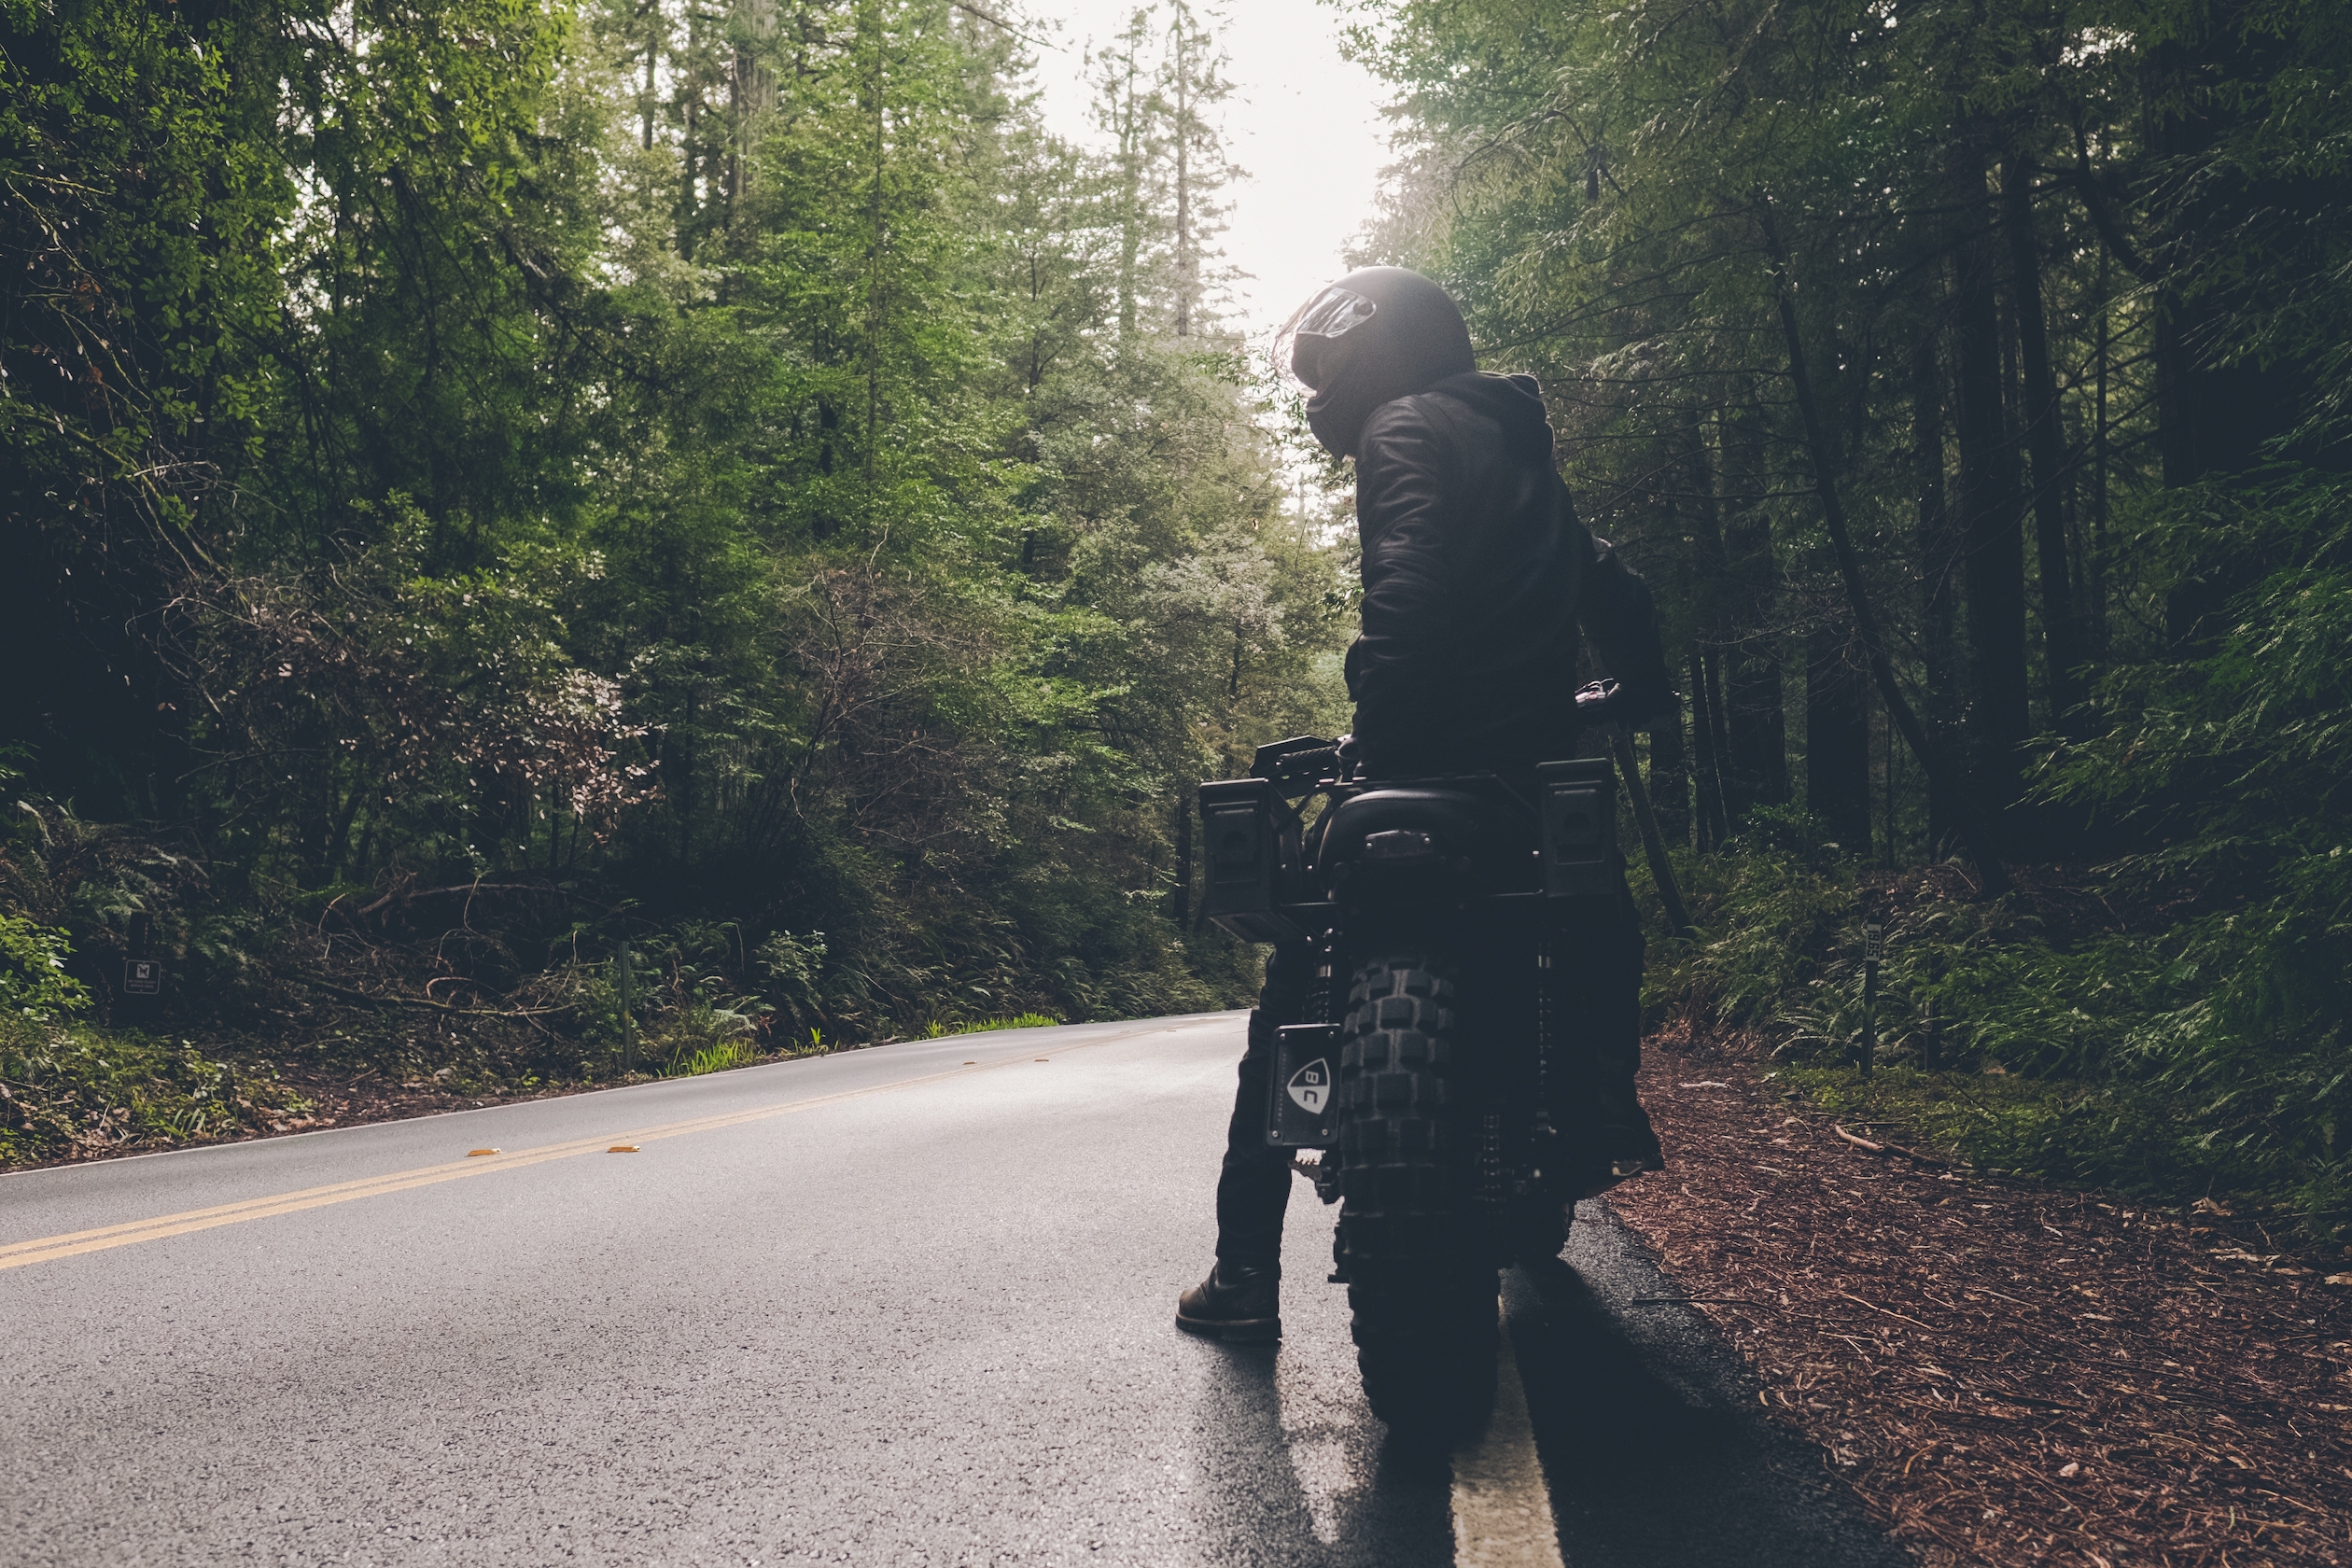 Photo of a person on a motorcycle parked taking a break at the edge of a forest.